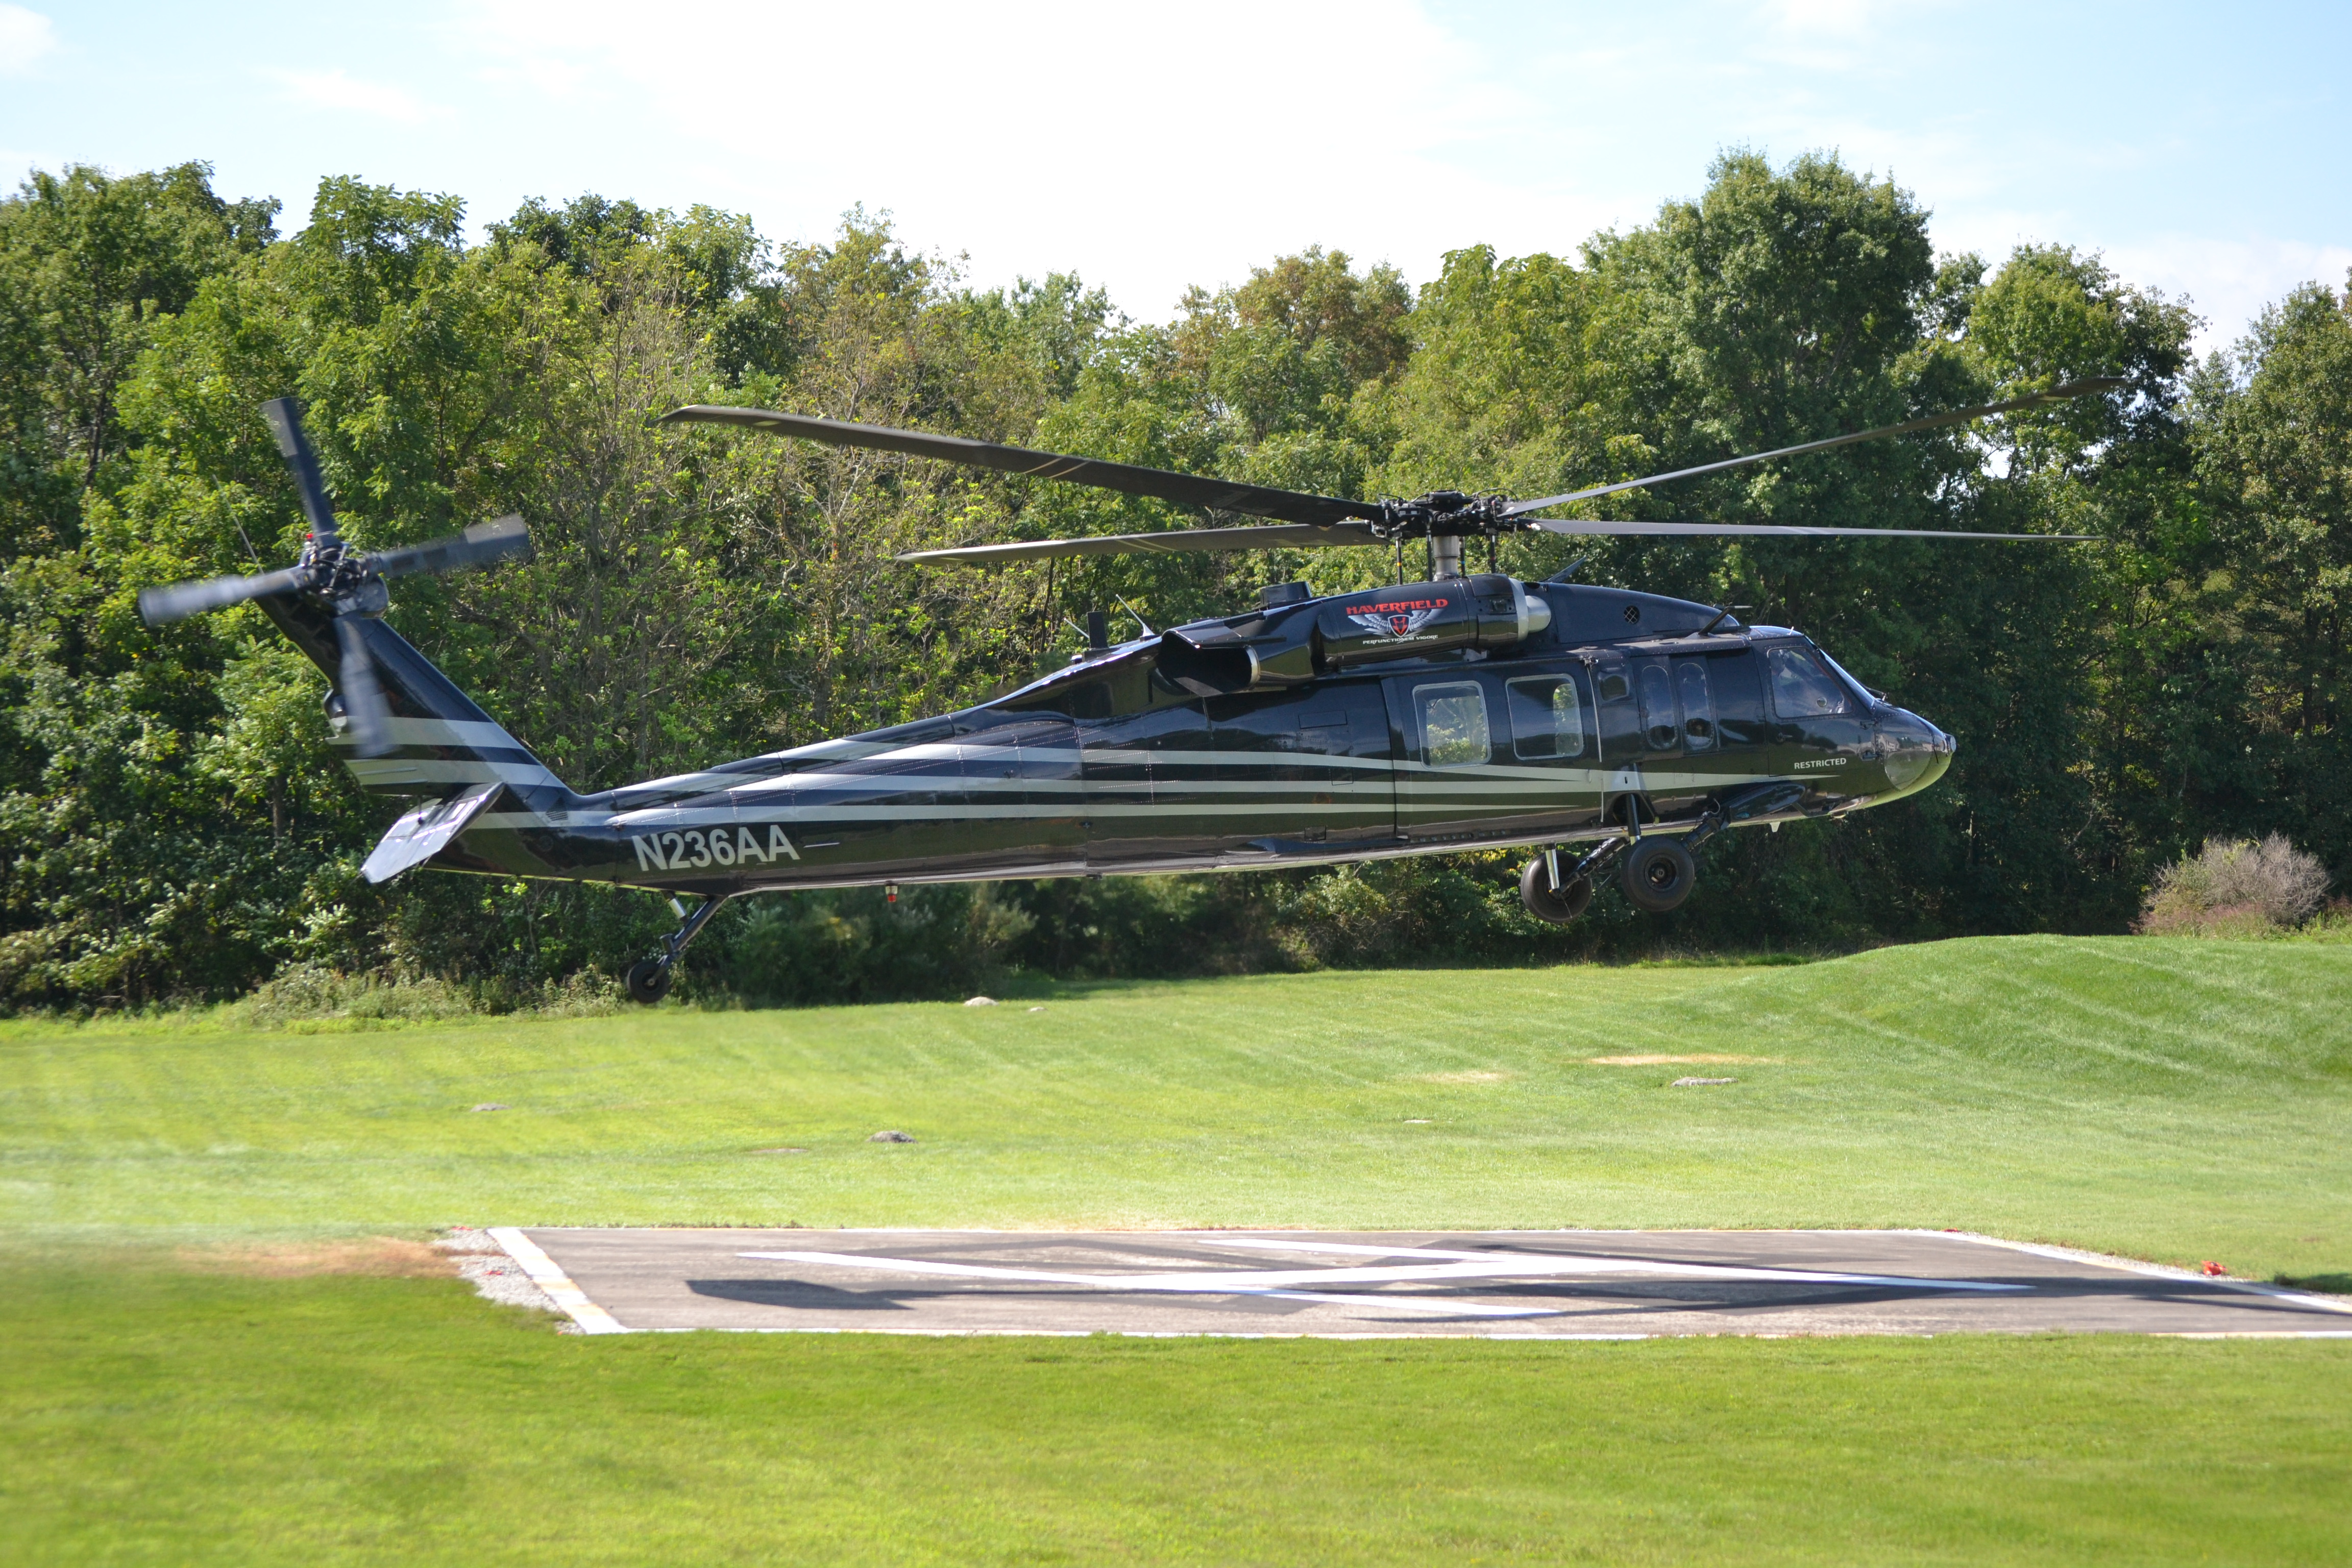 Haverfield Aviation will be using its new Black Hawk to help support its work primarily in the electric utility industry. Haverfield Aviation Photo